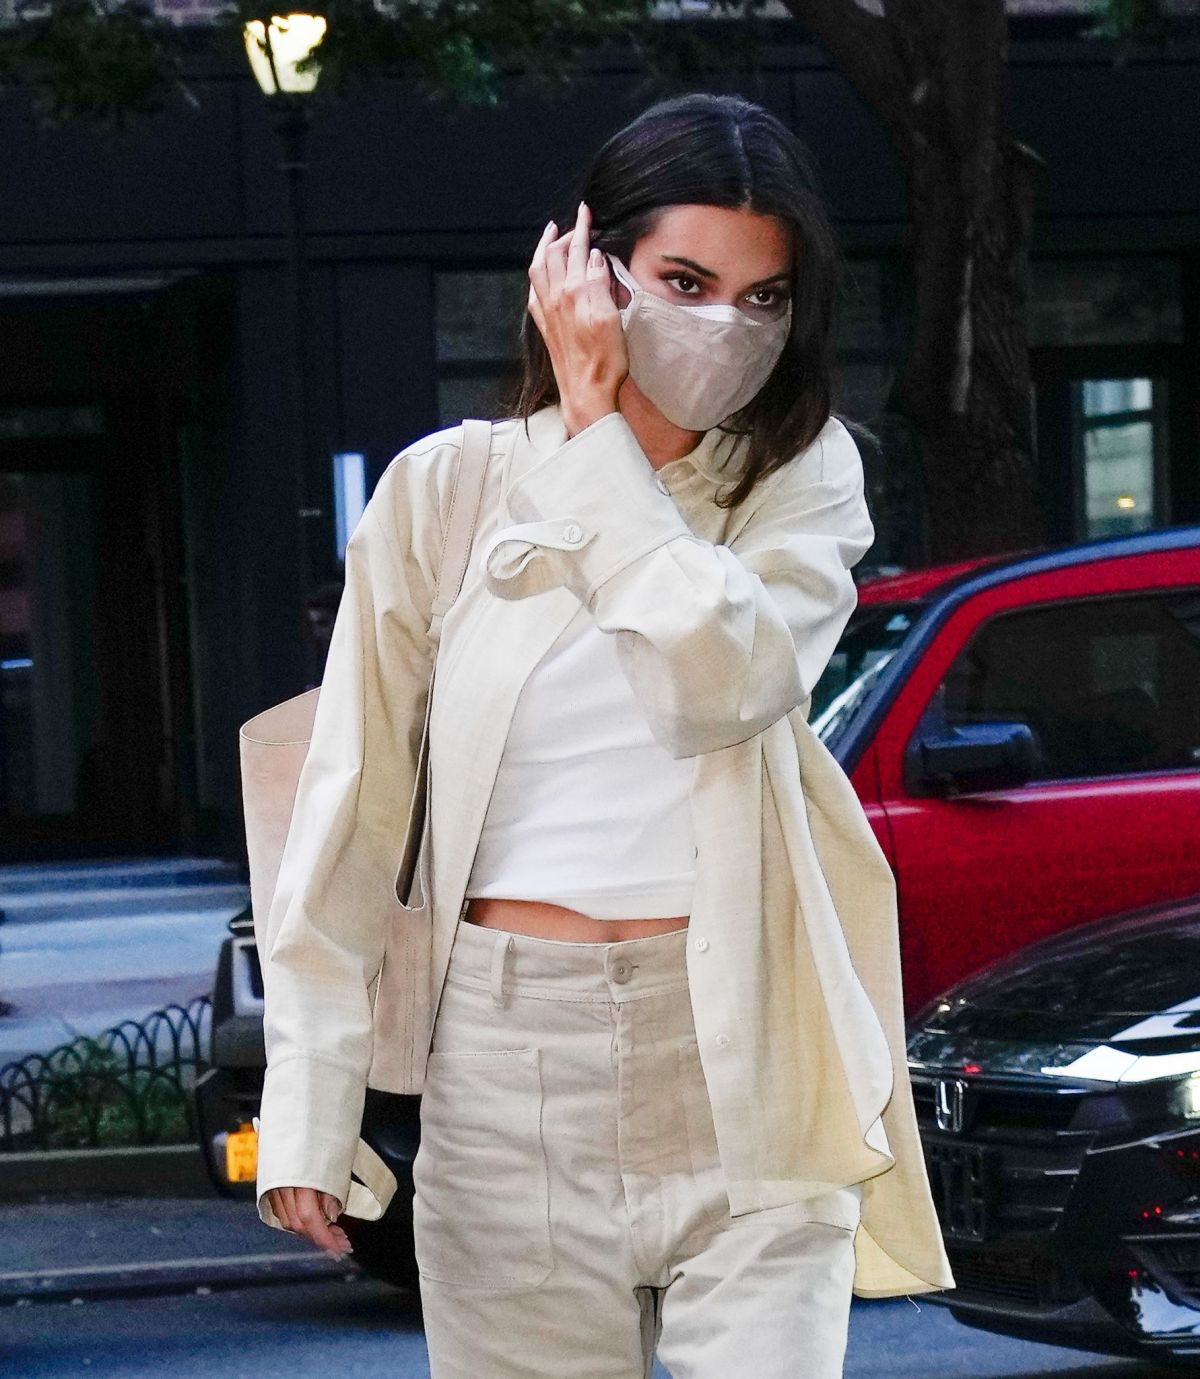 KENDALL JENNER Out and About in New York 09/14/2021 – HawtCelebs